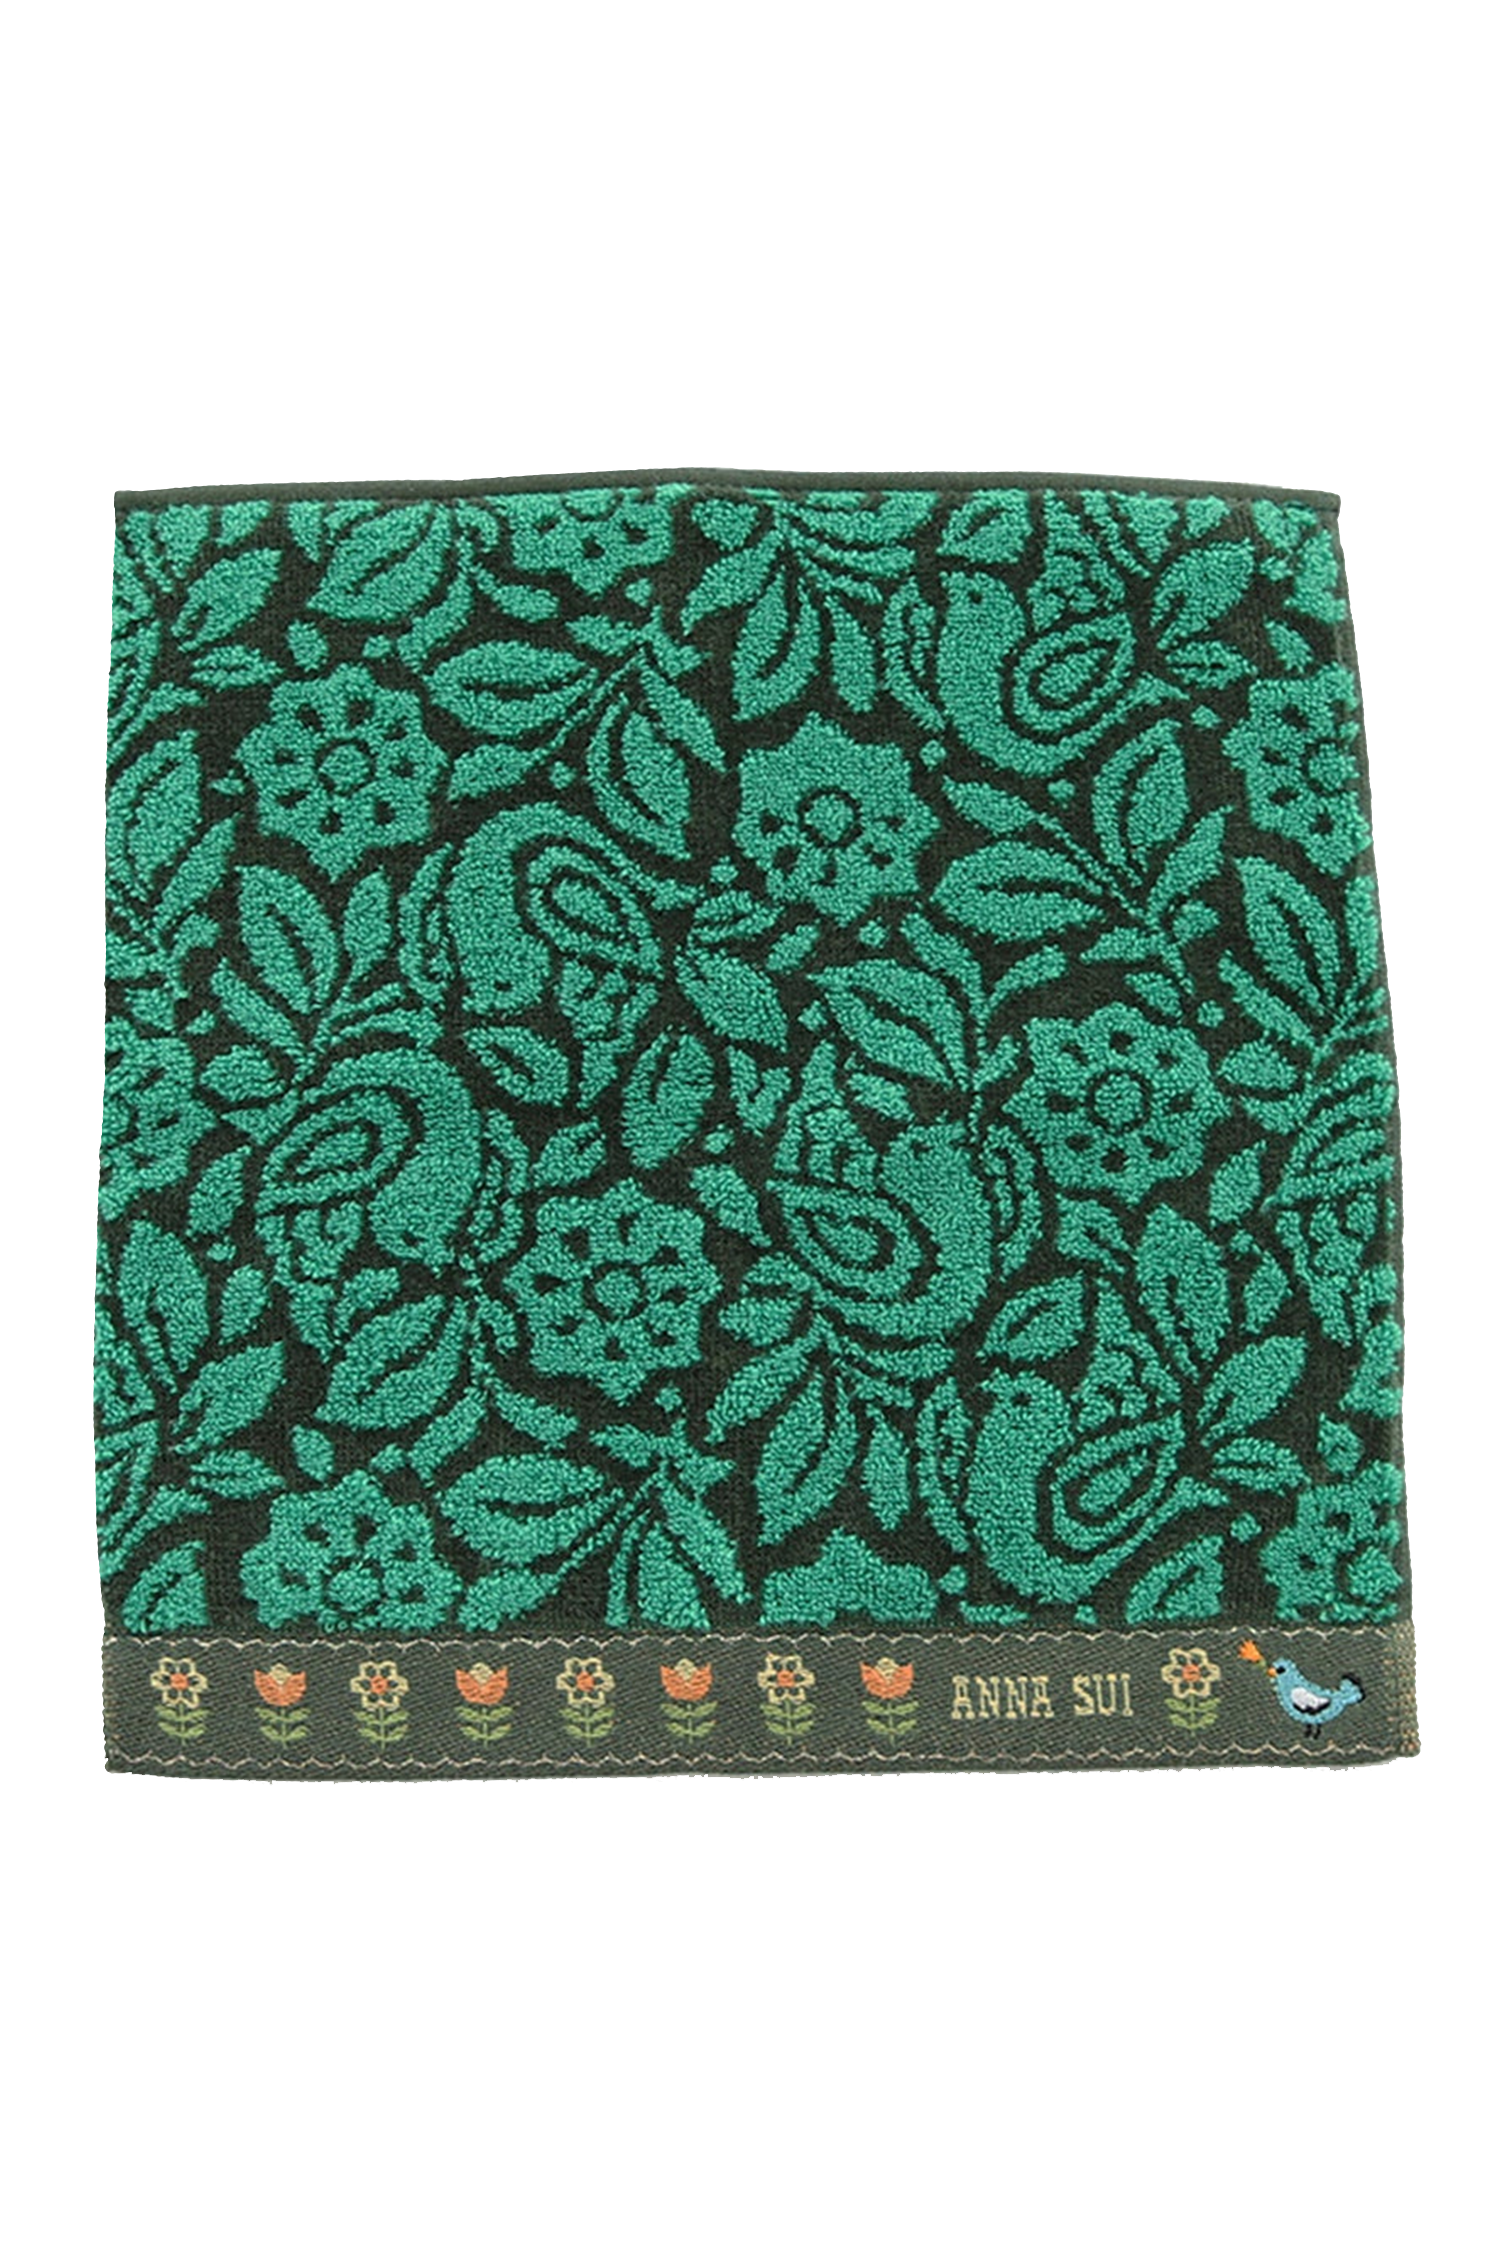 Washcloth, green, with birds floral design, border bottom with Anna Sui label, a bird, line of flowers